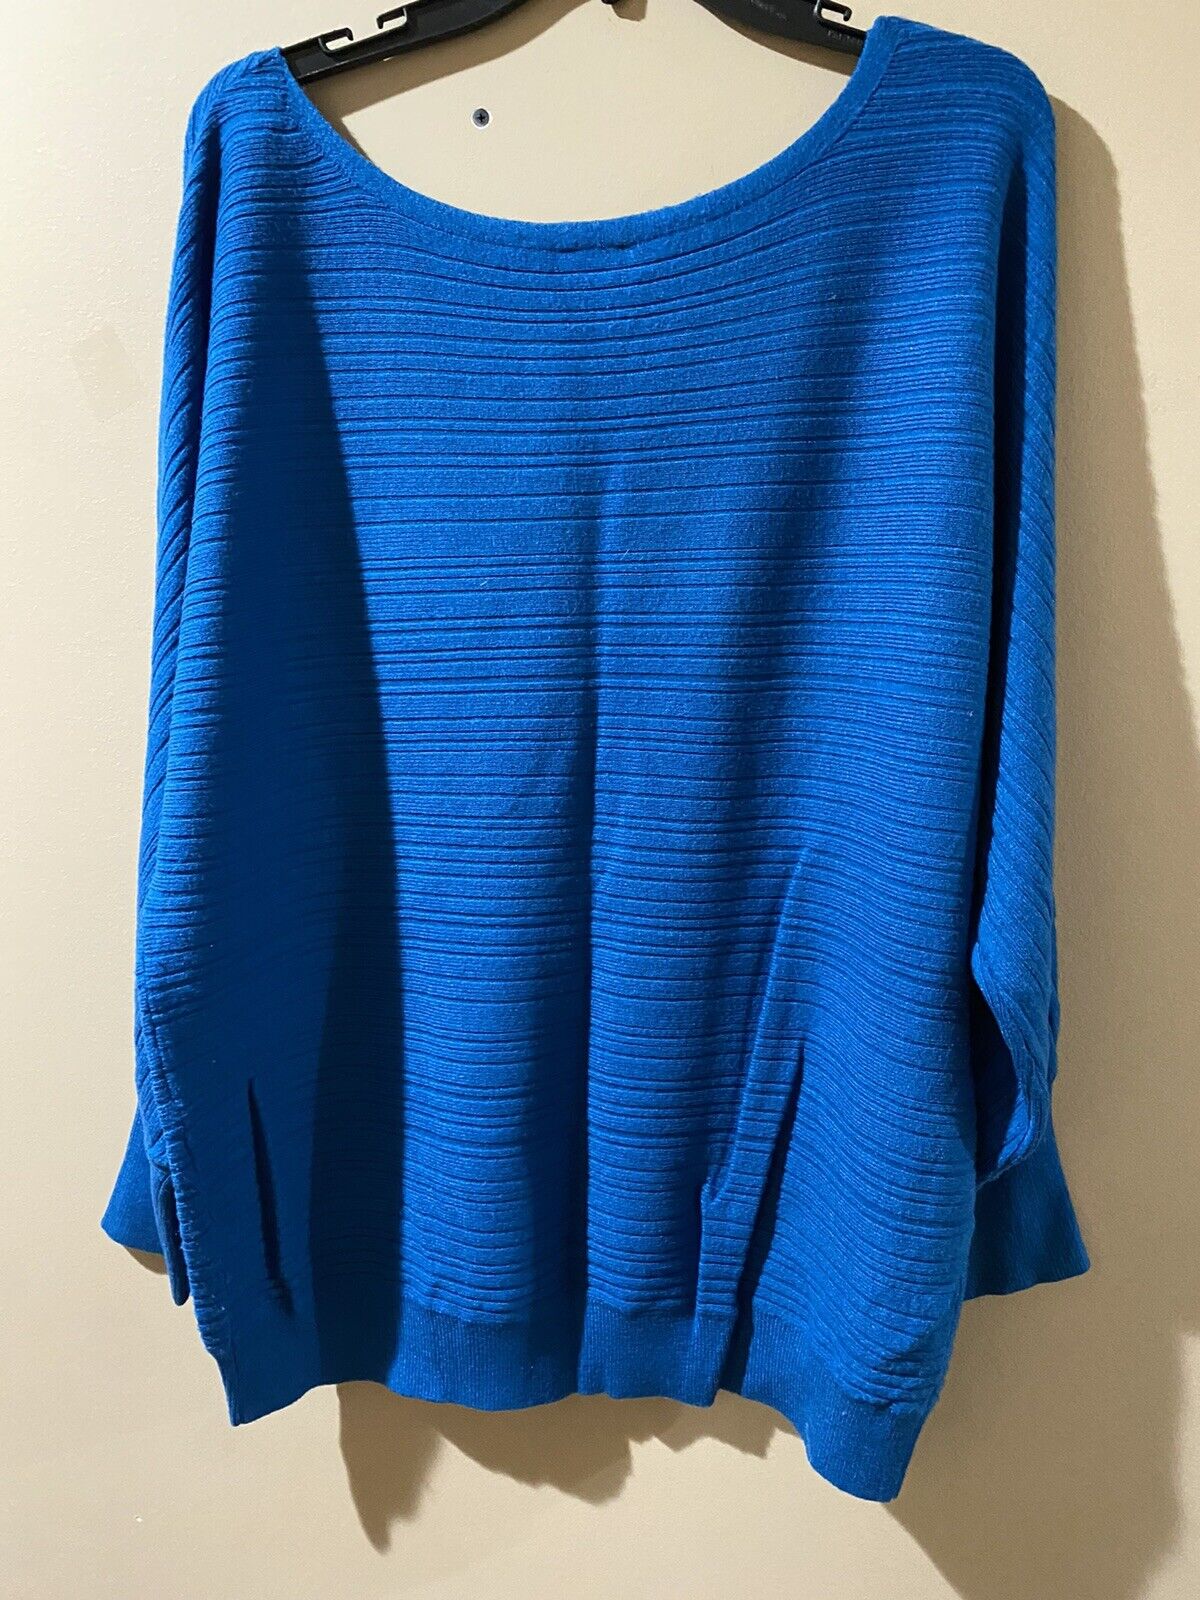 Chicos  Women’s Knit Tunic Top Sz 3 Large Turquoi… - image 7